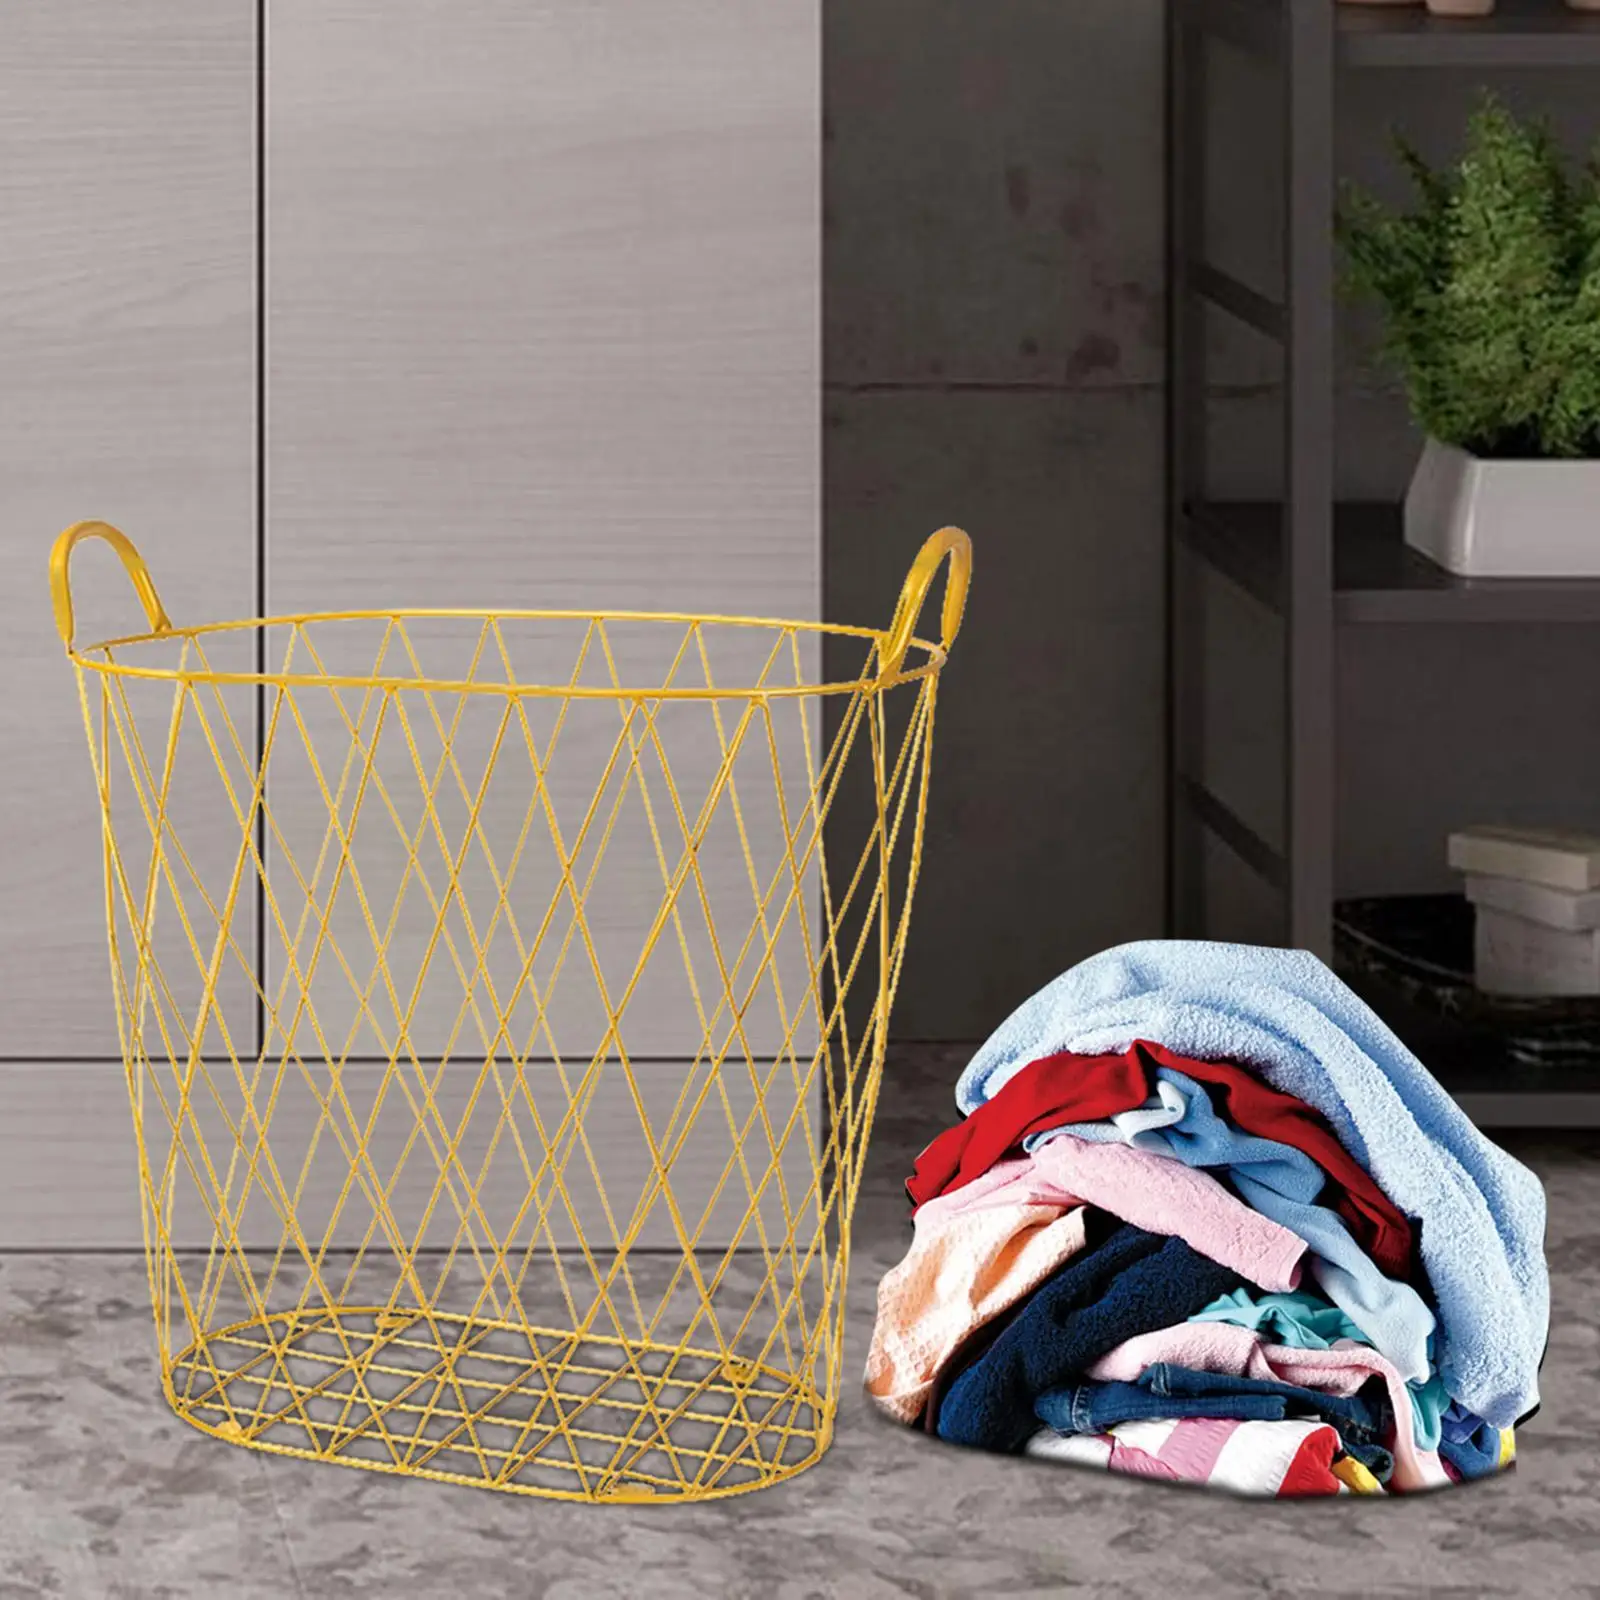 Metal Laundry Hamper Large Capacity with Handles Dirty Clothes Basket for Bathroom Laundry Room Bedroom Living Room Household